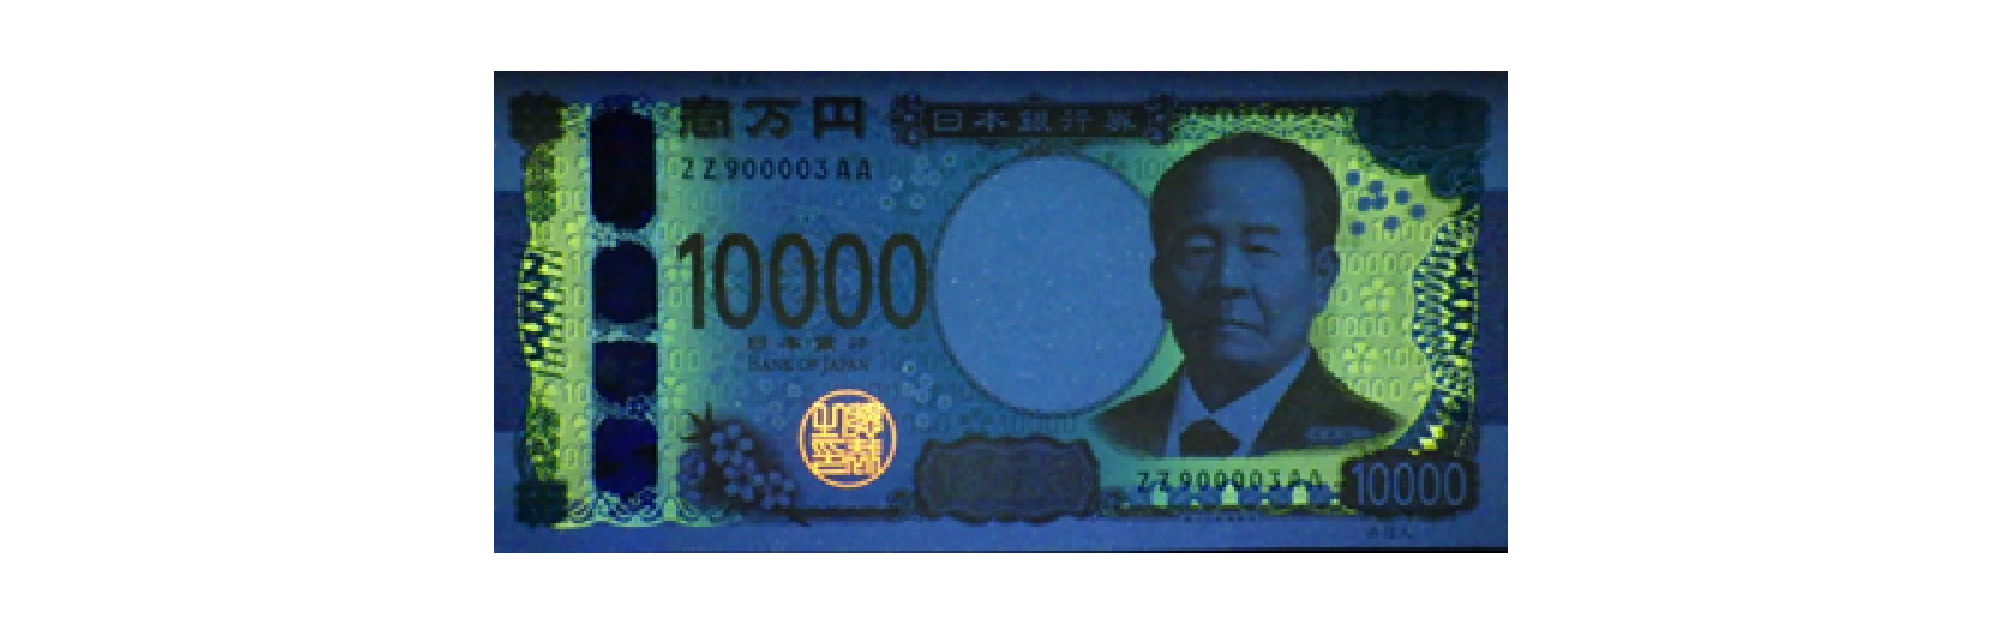 Image of the front of the 10,000 yen note under ultraviolet light, showing how the Governor's seal and some parts of the background pattern fluoresce.